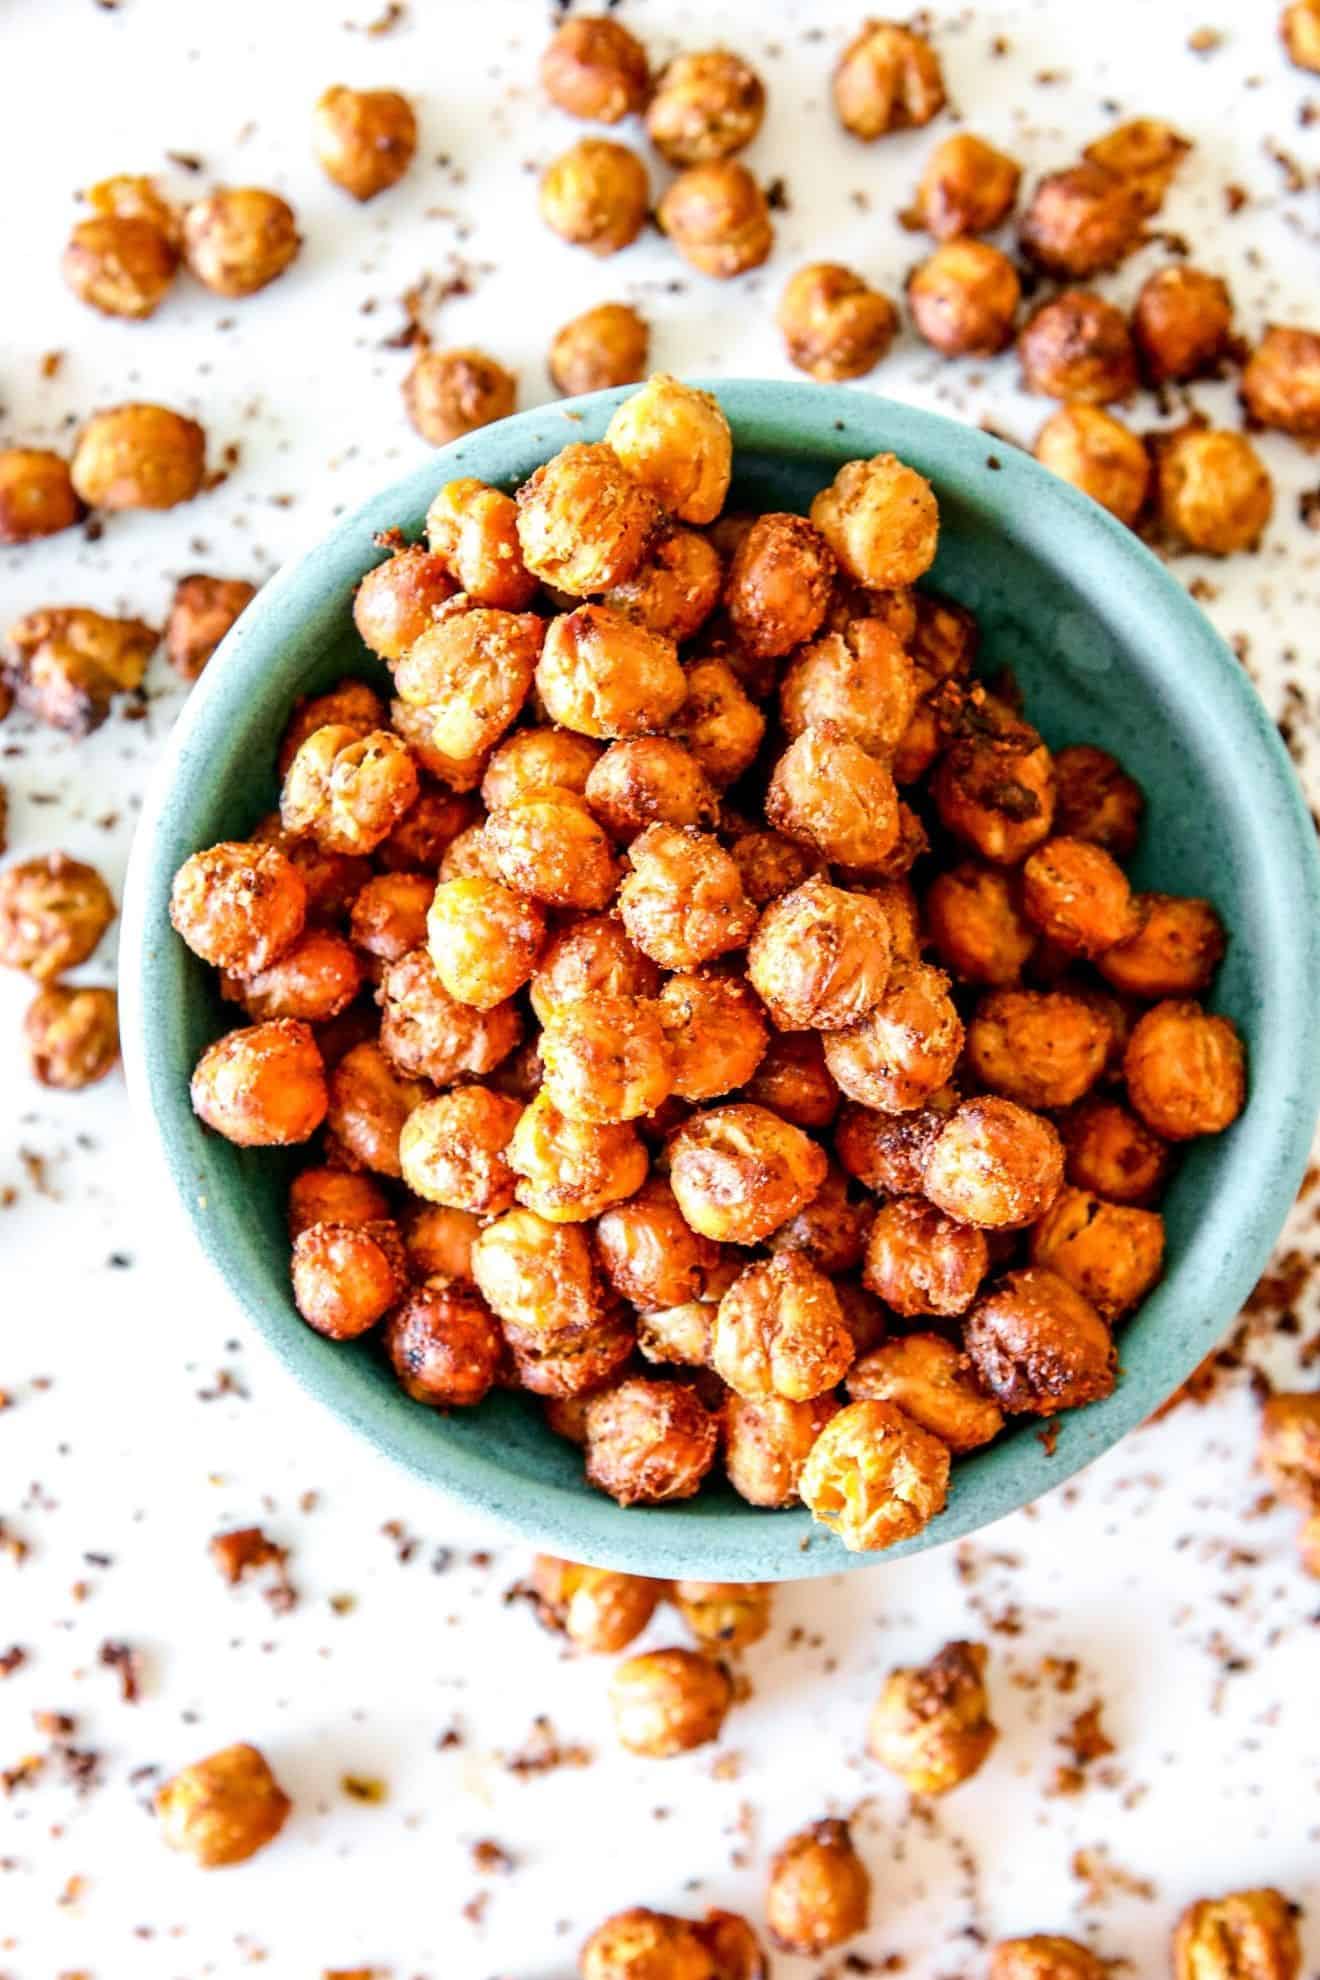 Crunchy Air Fryer Chickpeas - The Toasted Pine Nut